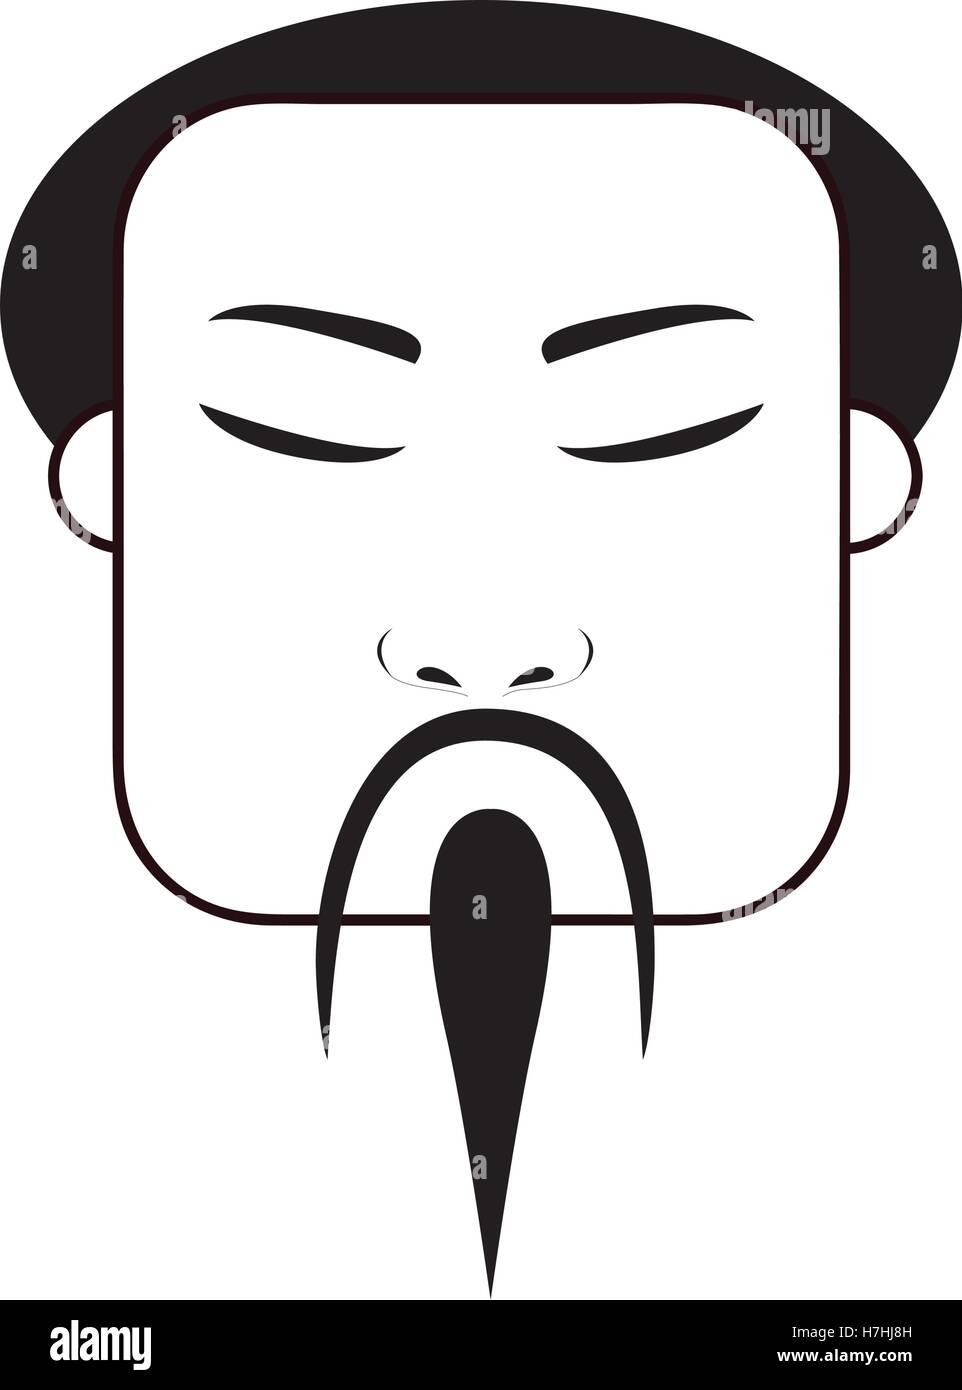 east asian traditional man icon image vector illustration design Stock Vector